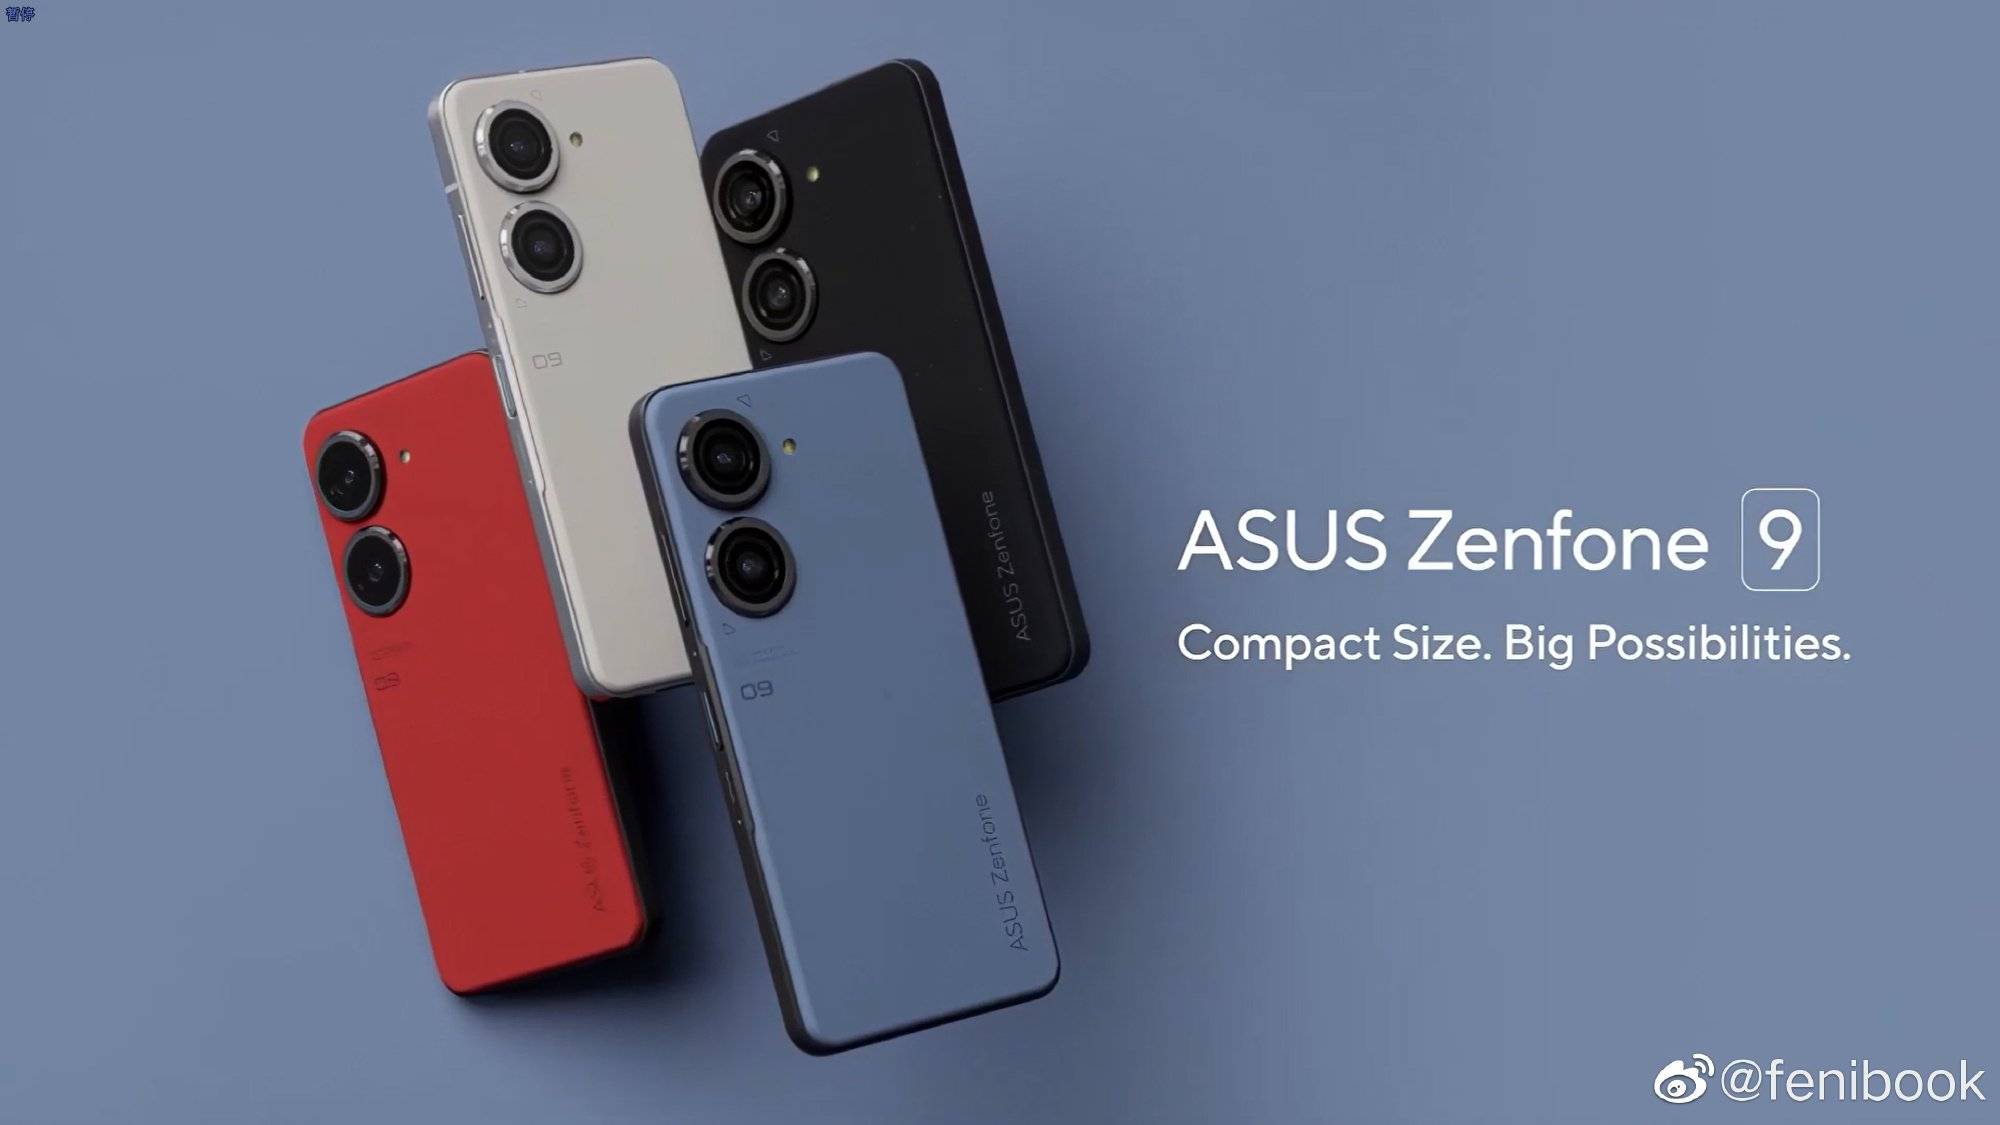 Asus Zenfone 9 is Releasing soon as Compact Flagship with Snapdragon 8+Gen 1